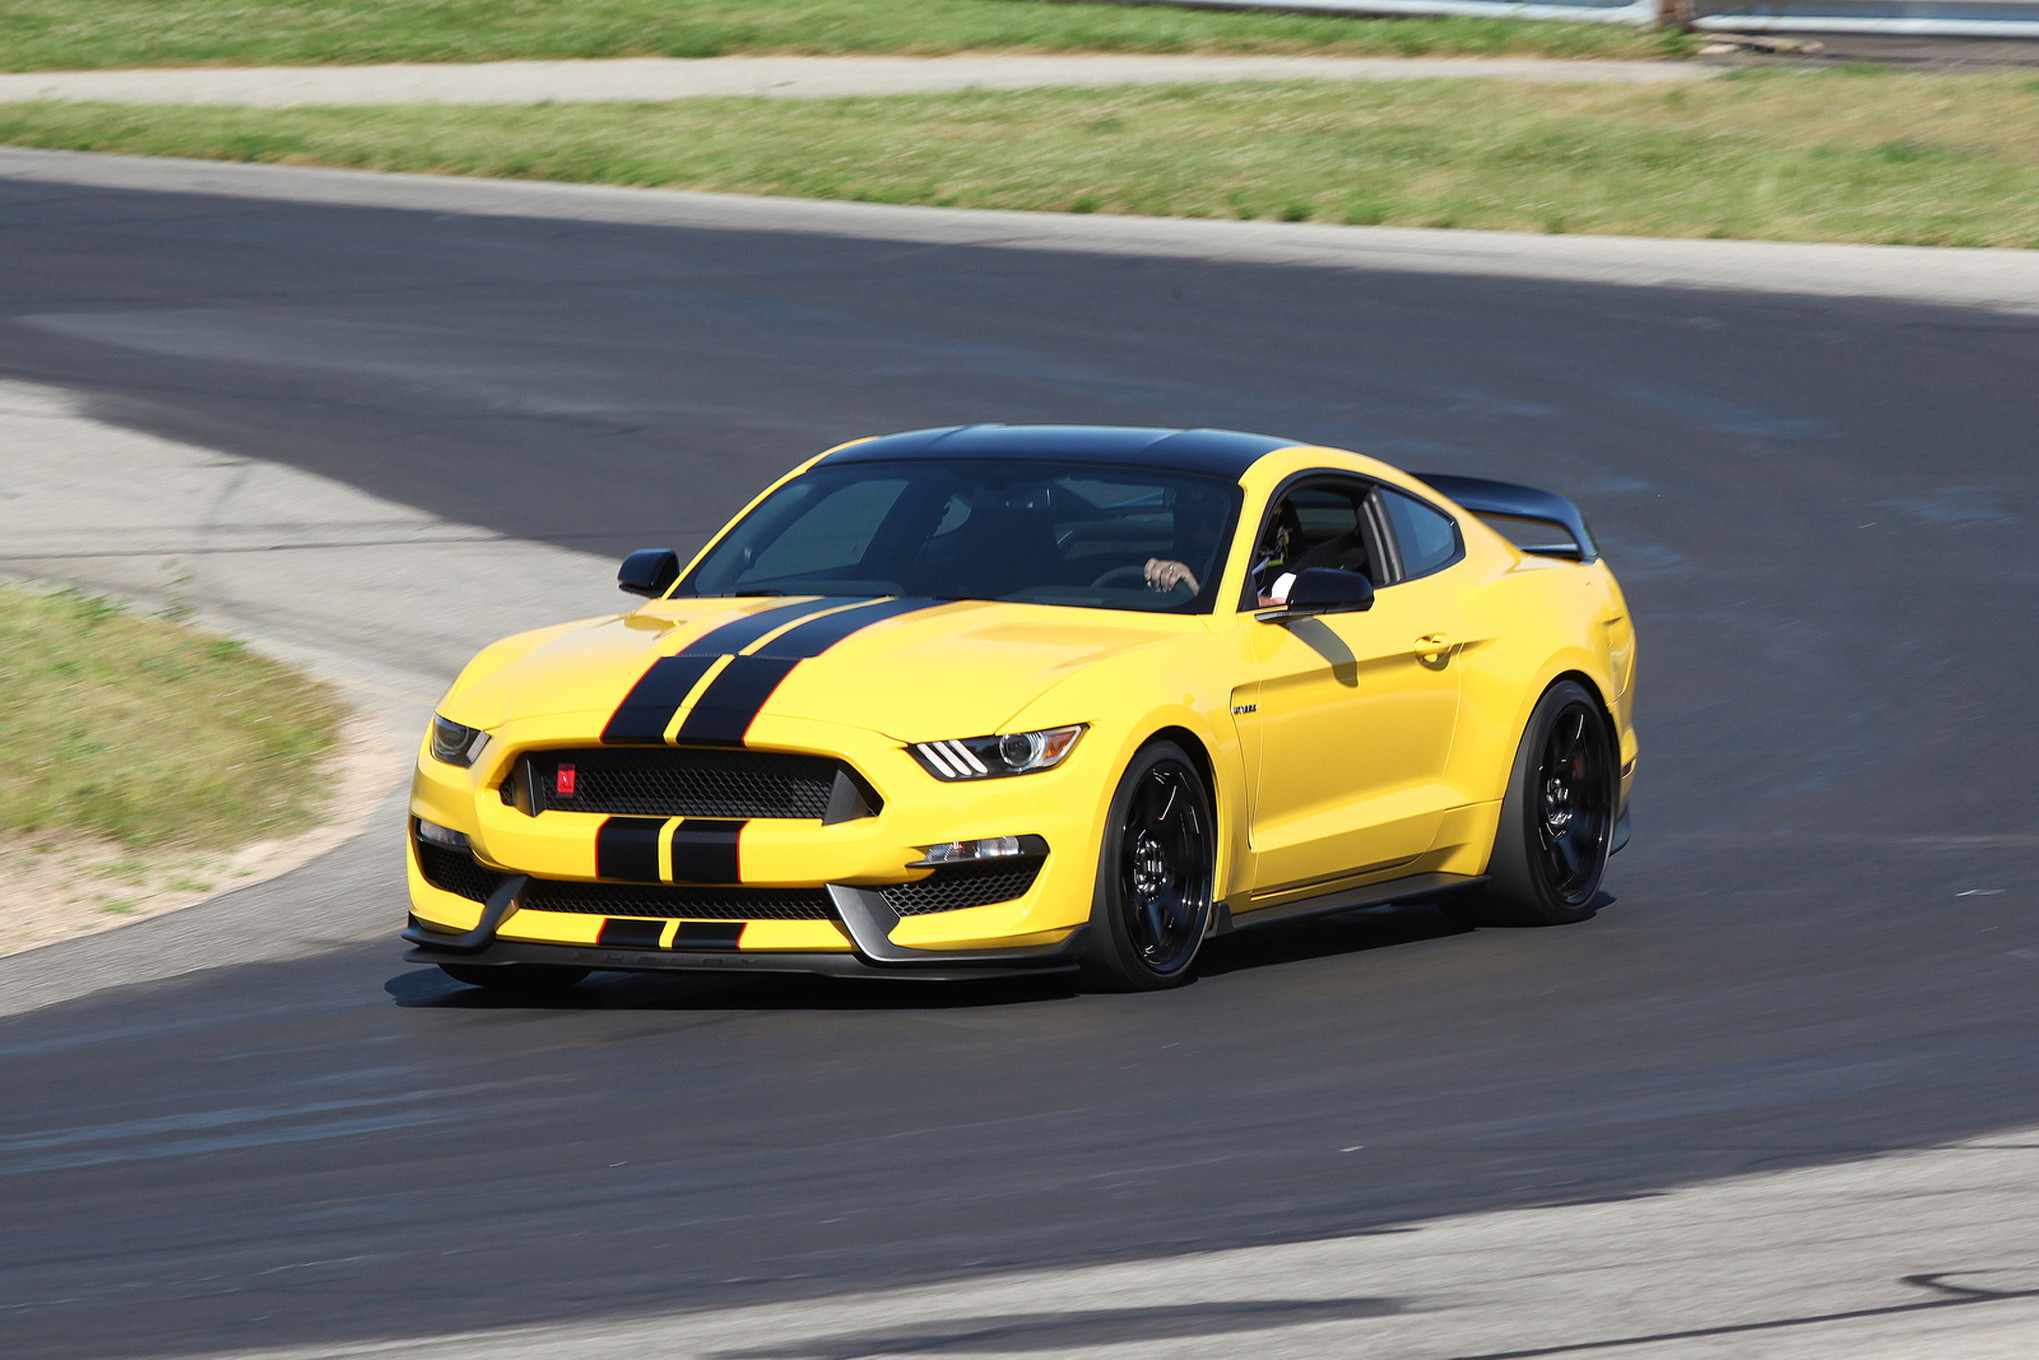 2039x1360 Yellow Ford Mustang Shelby GT350 HD Wallpaper